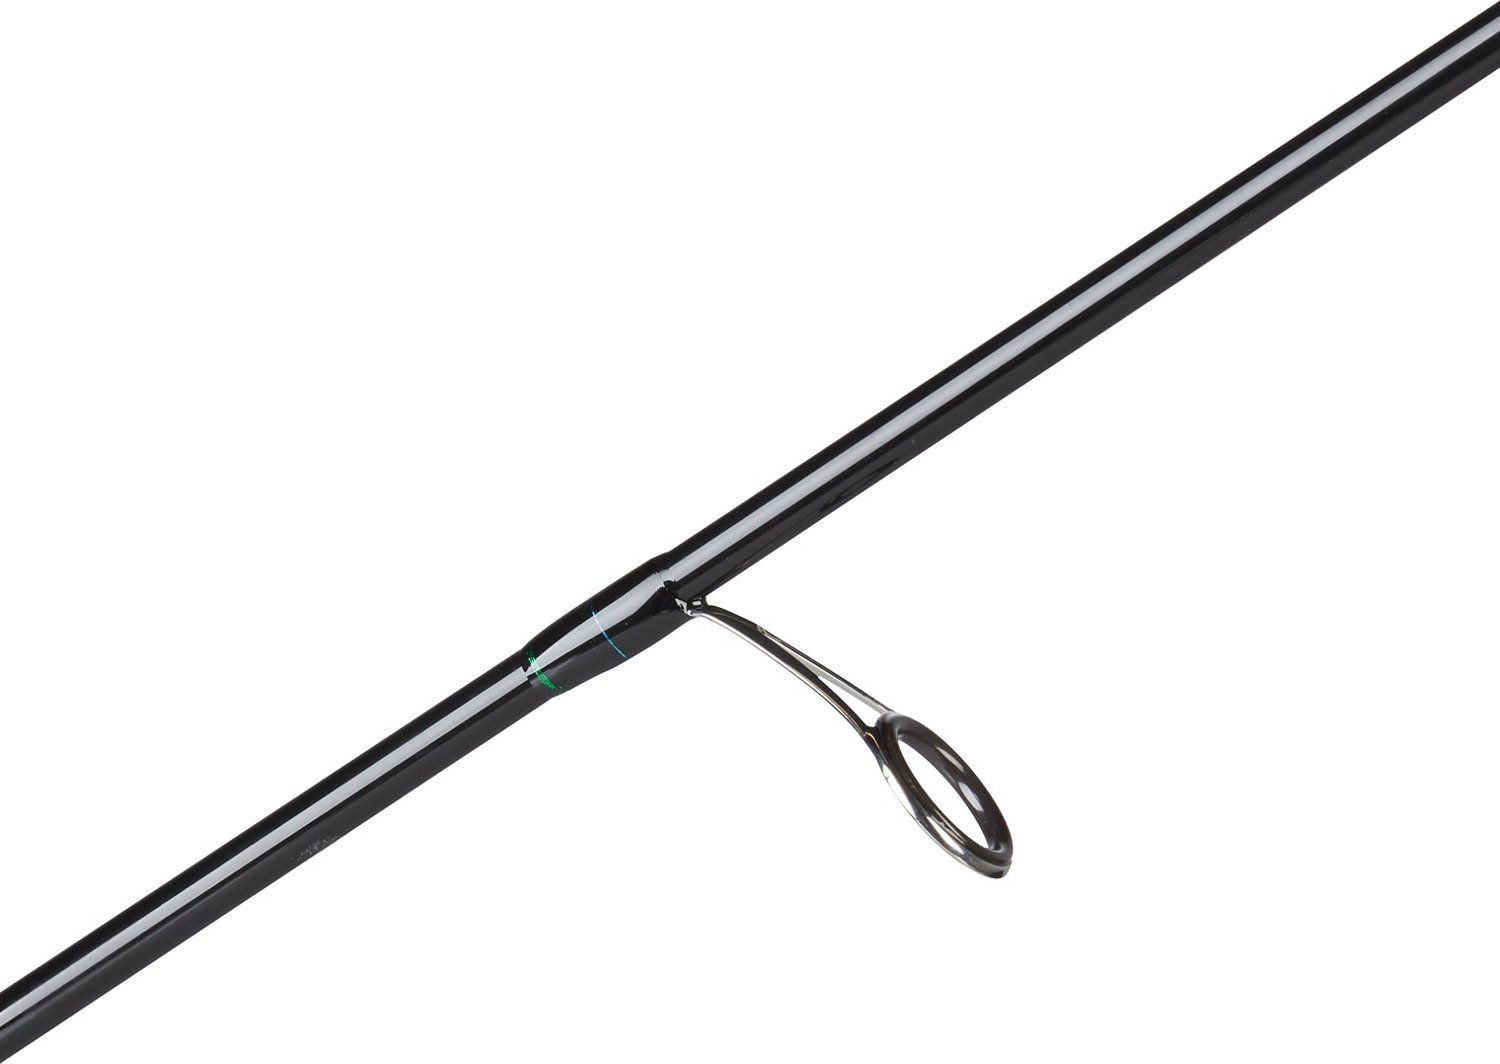 Falcon Coastal Clear Water Gulf Caster Spin 7'6 Medium Spinning Rod |  SWS-76M